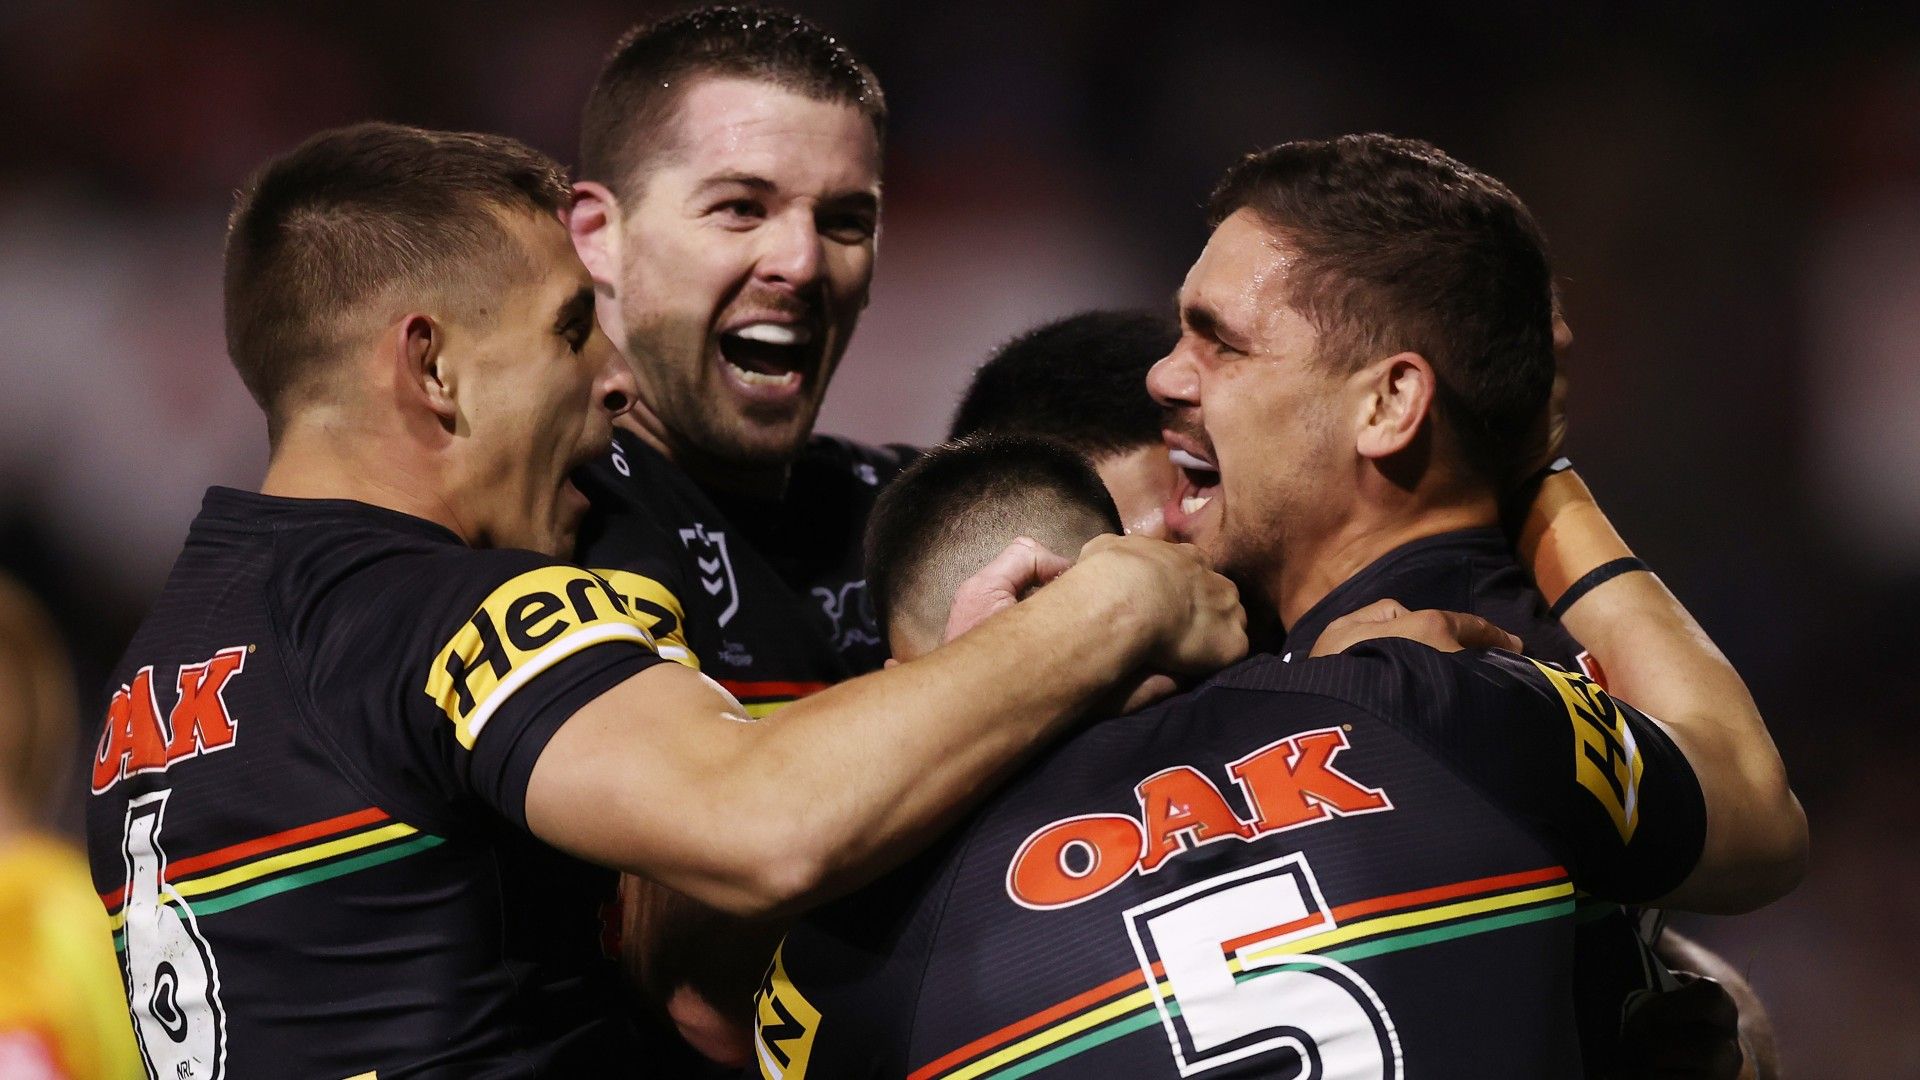 No Origin woes for Penrith after comfortable win over Bulldogs